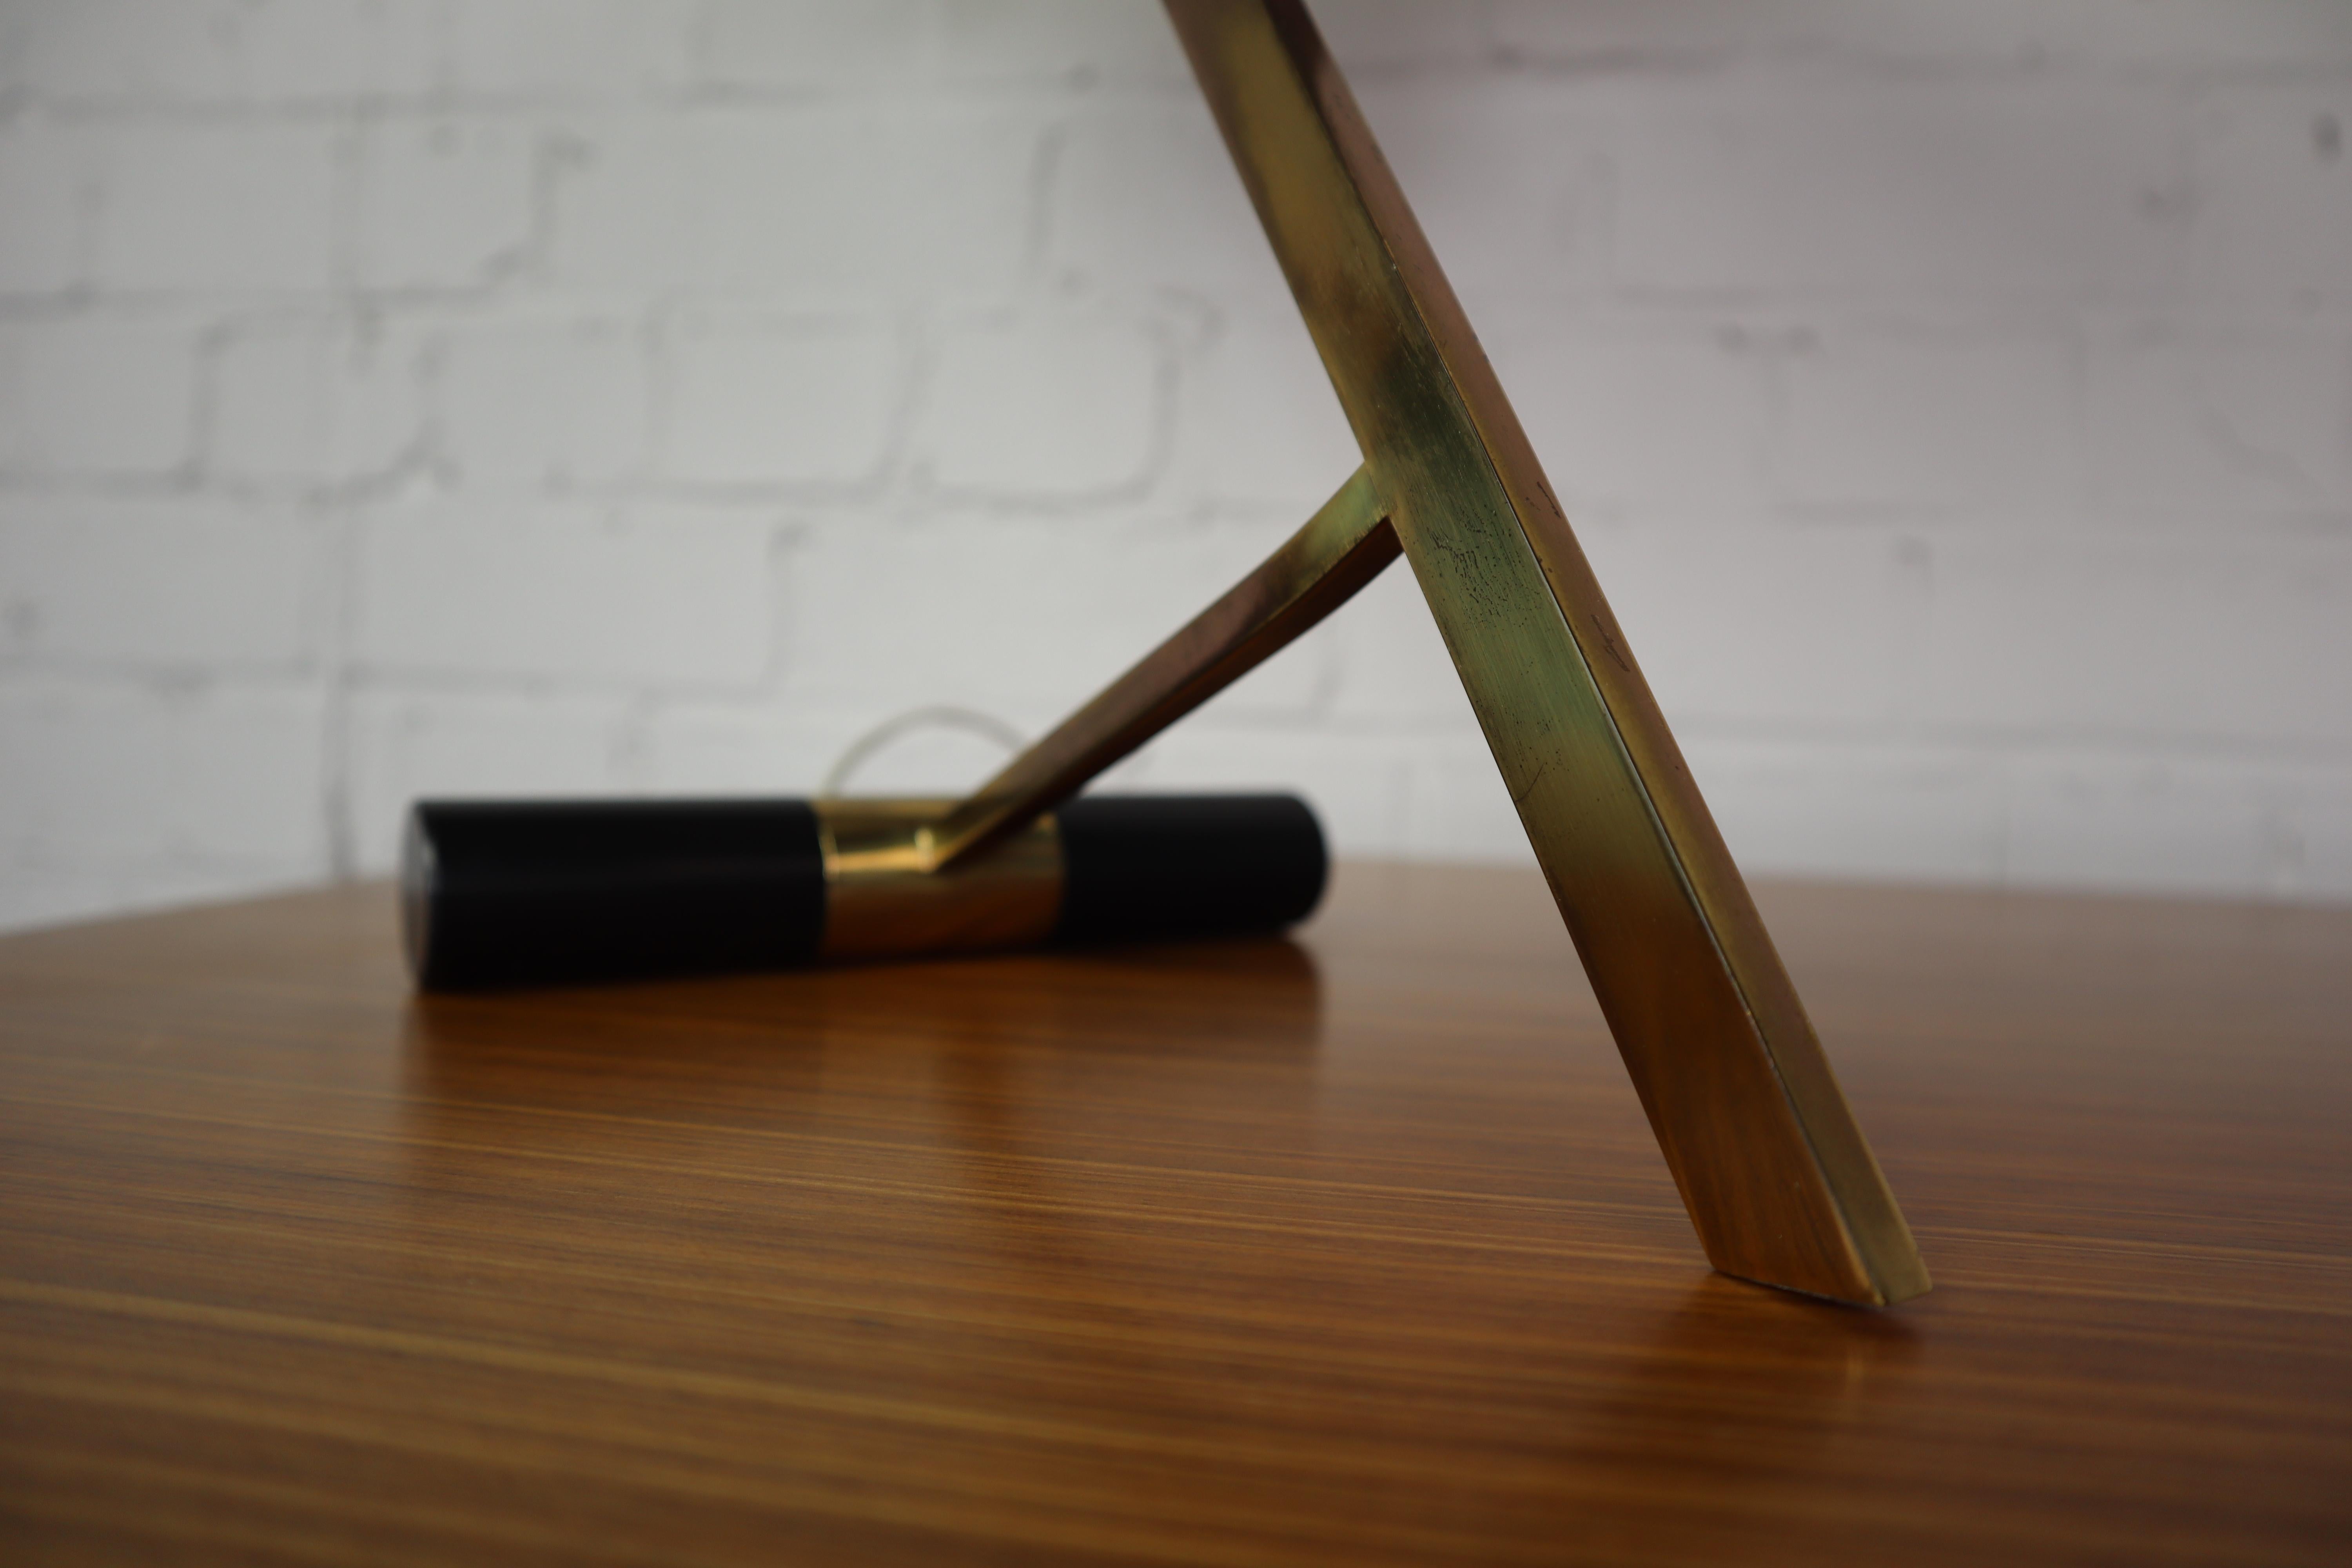 Vintage desk lamp by louis christiaan kalff for philips. Design from the 1960s. Model 